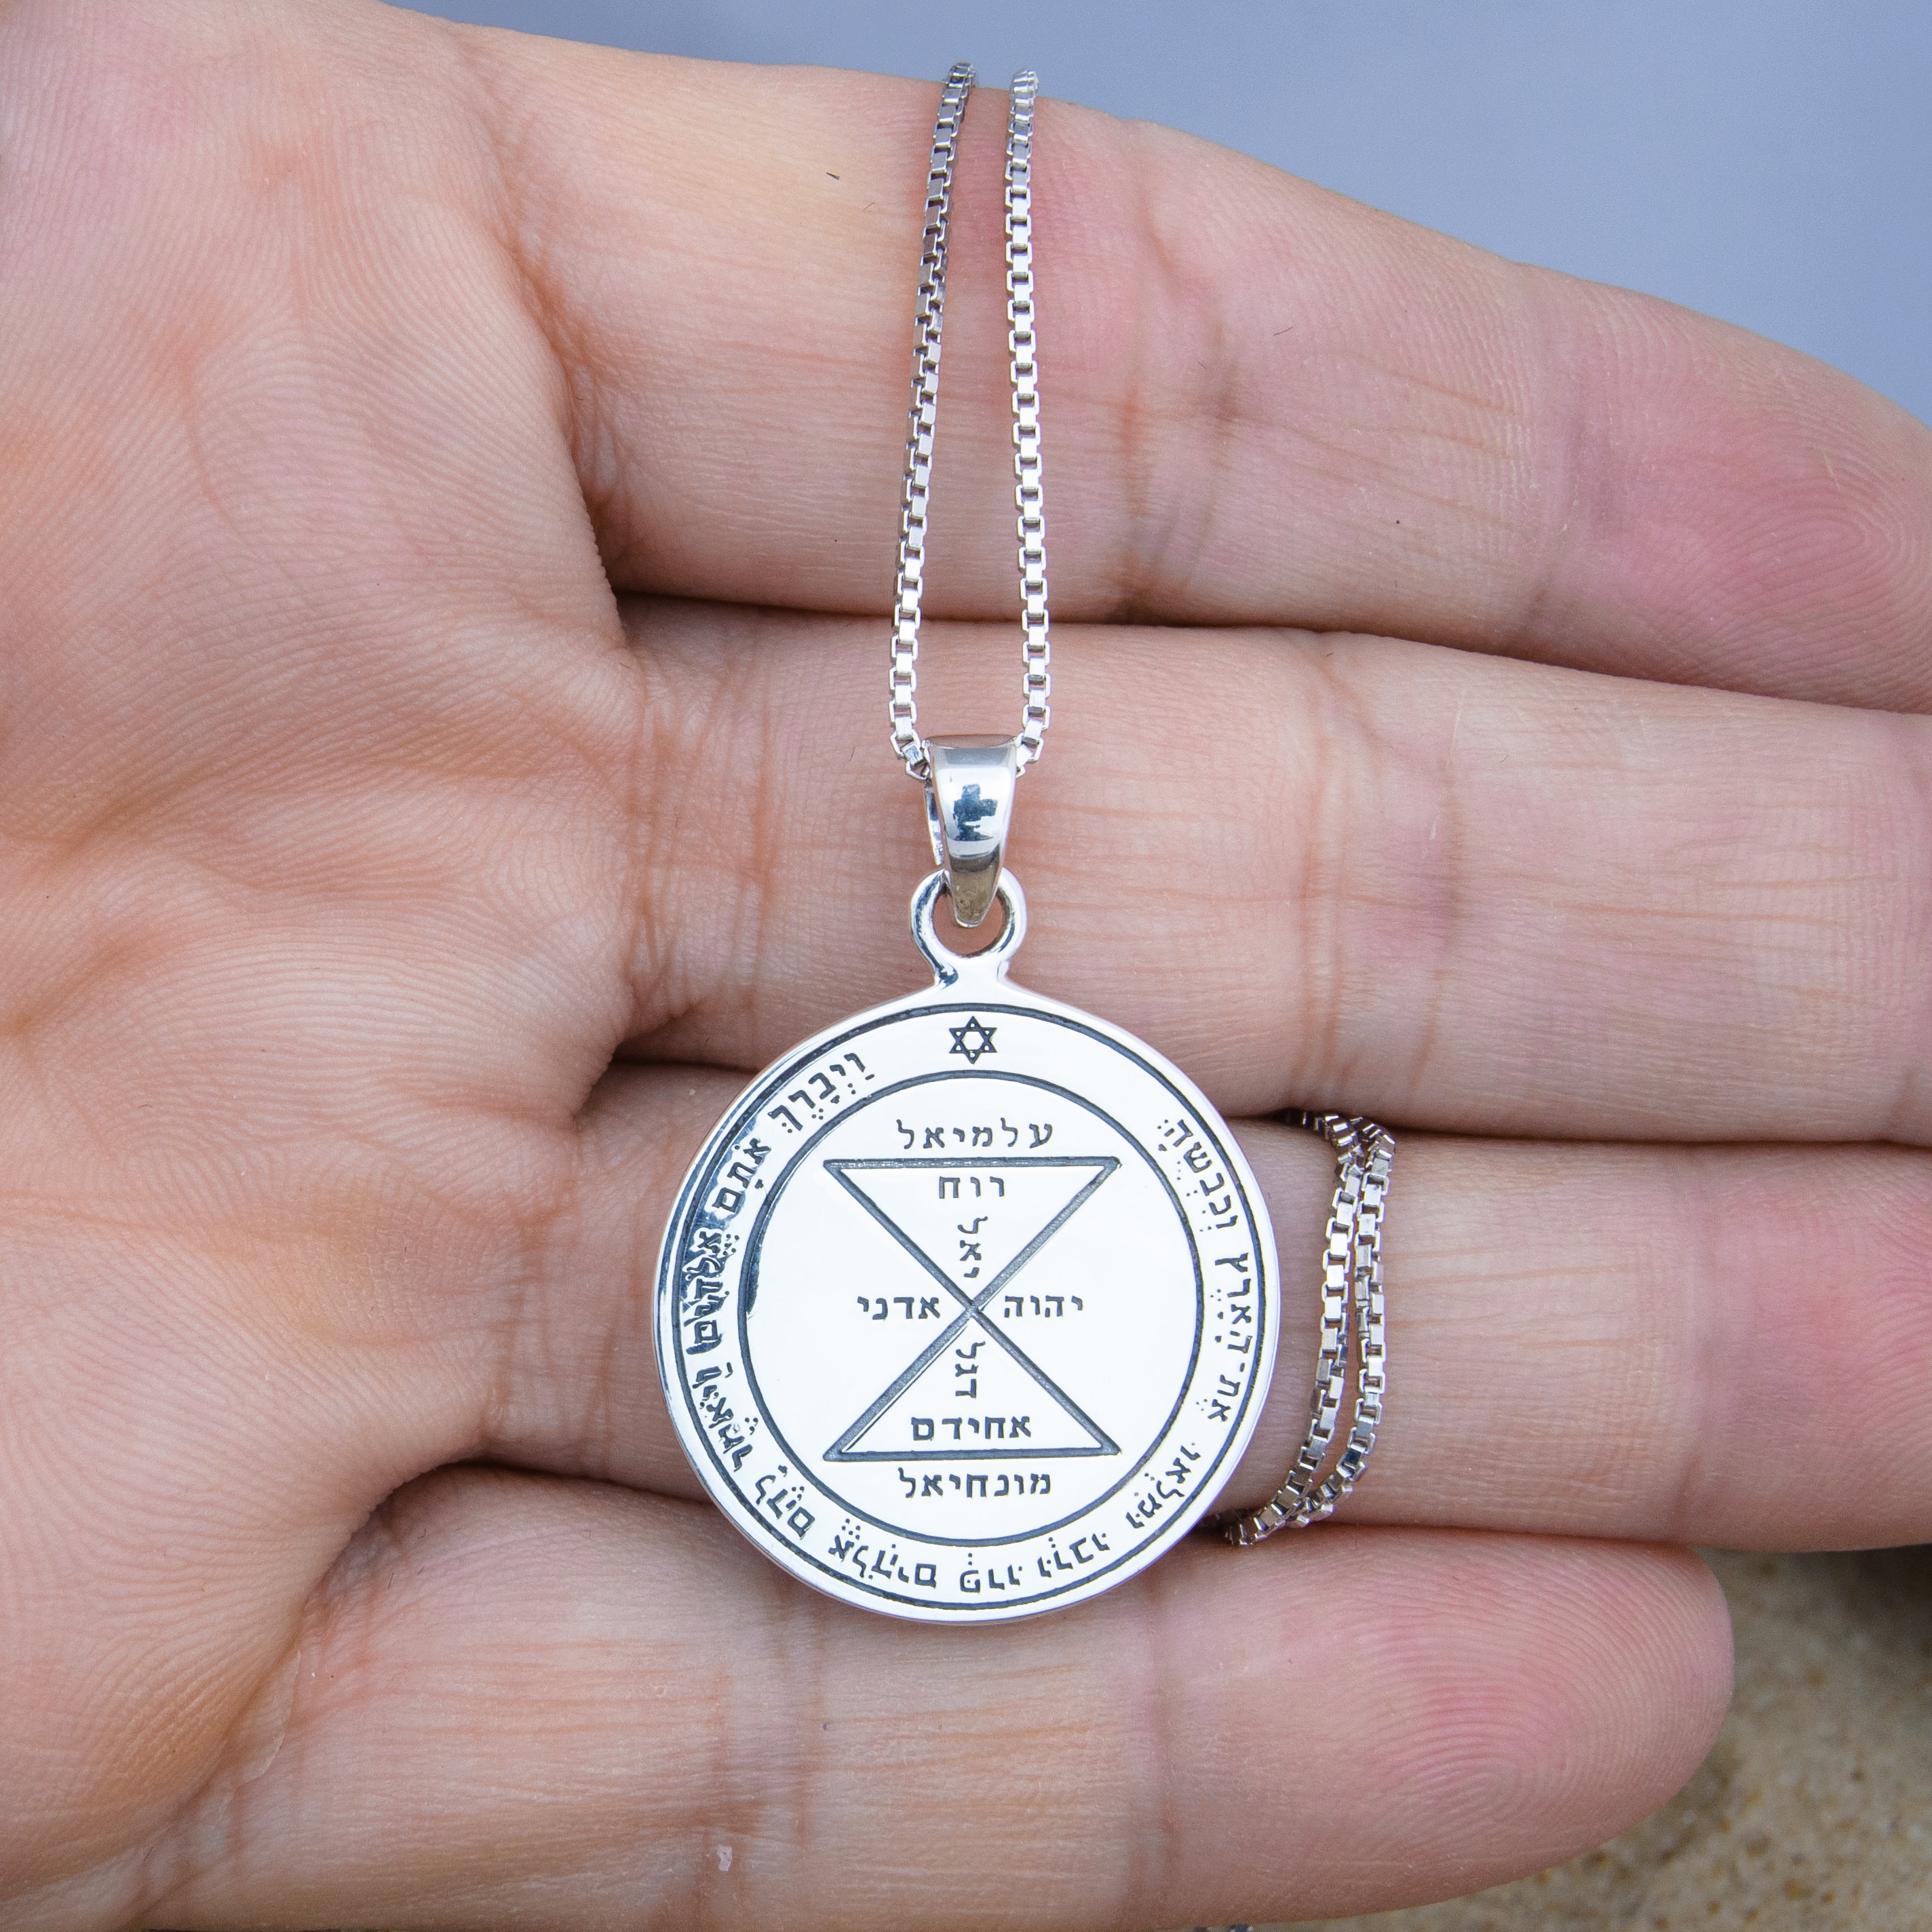 My Altar Solomons 3rd Pentacle of The Saturn for Protection Against Others Plots Rose Gold Stainless Steel Pendant Necklace